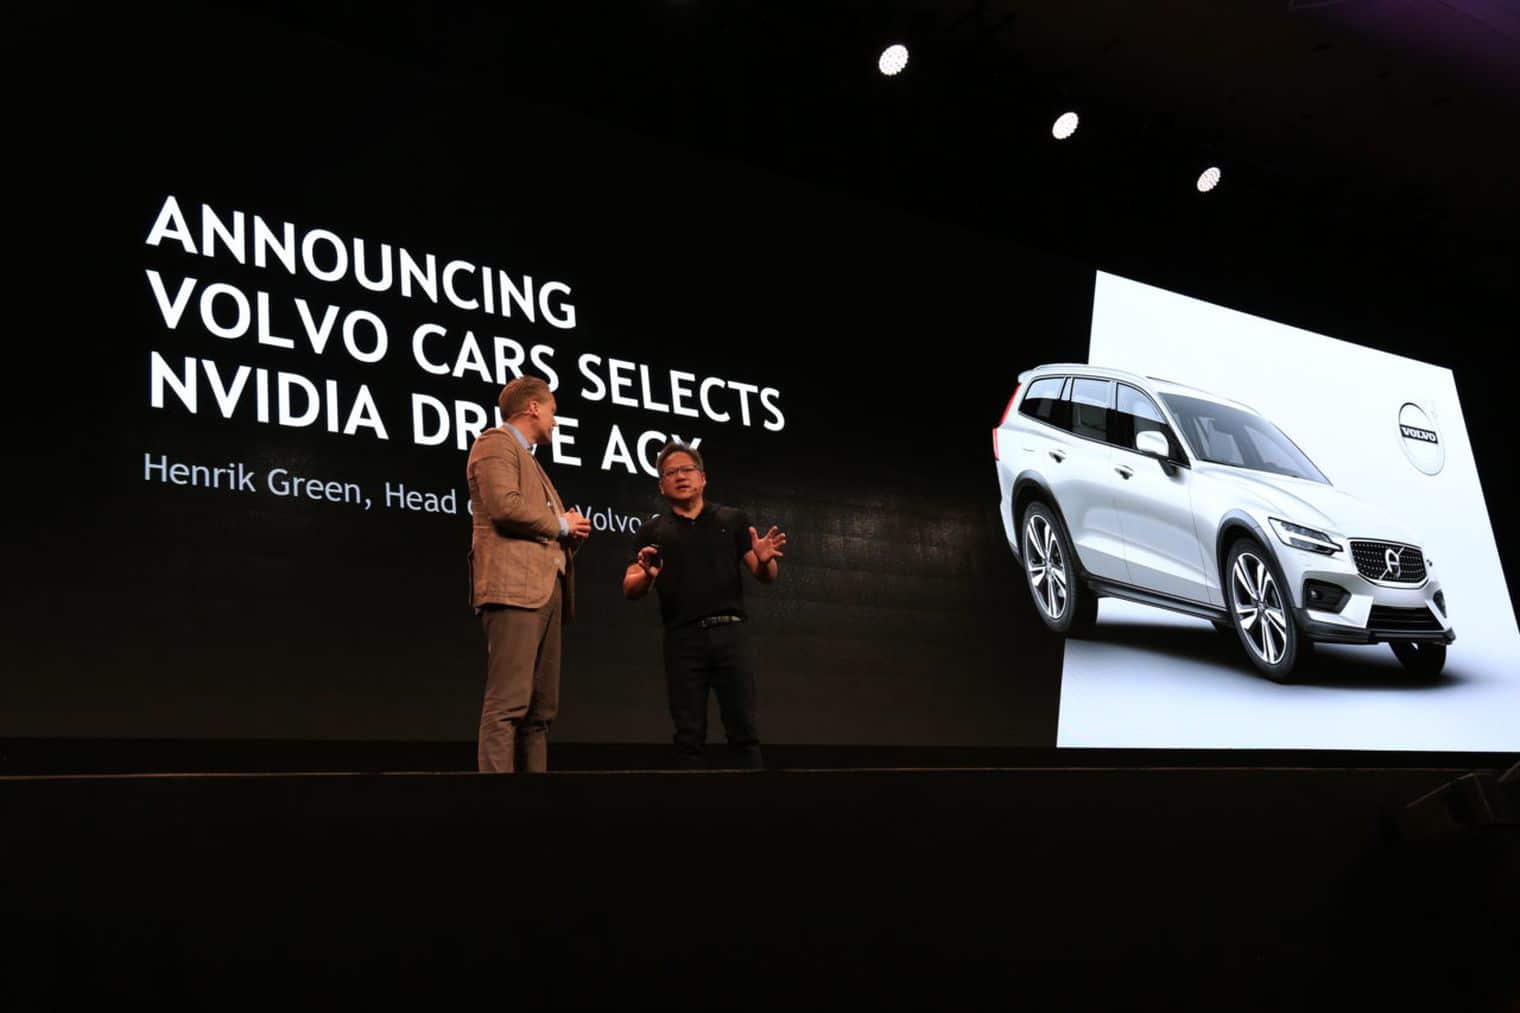 Nvidia will come in 2020 under the hoods of Volvo cars